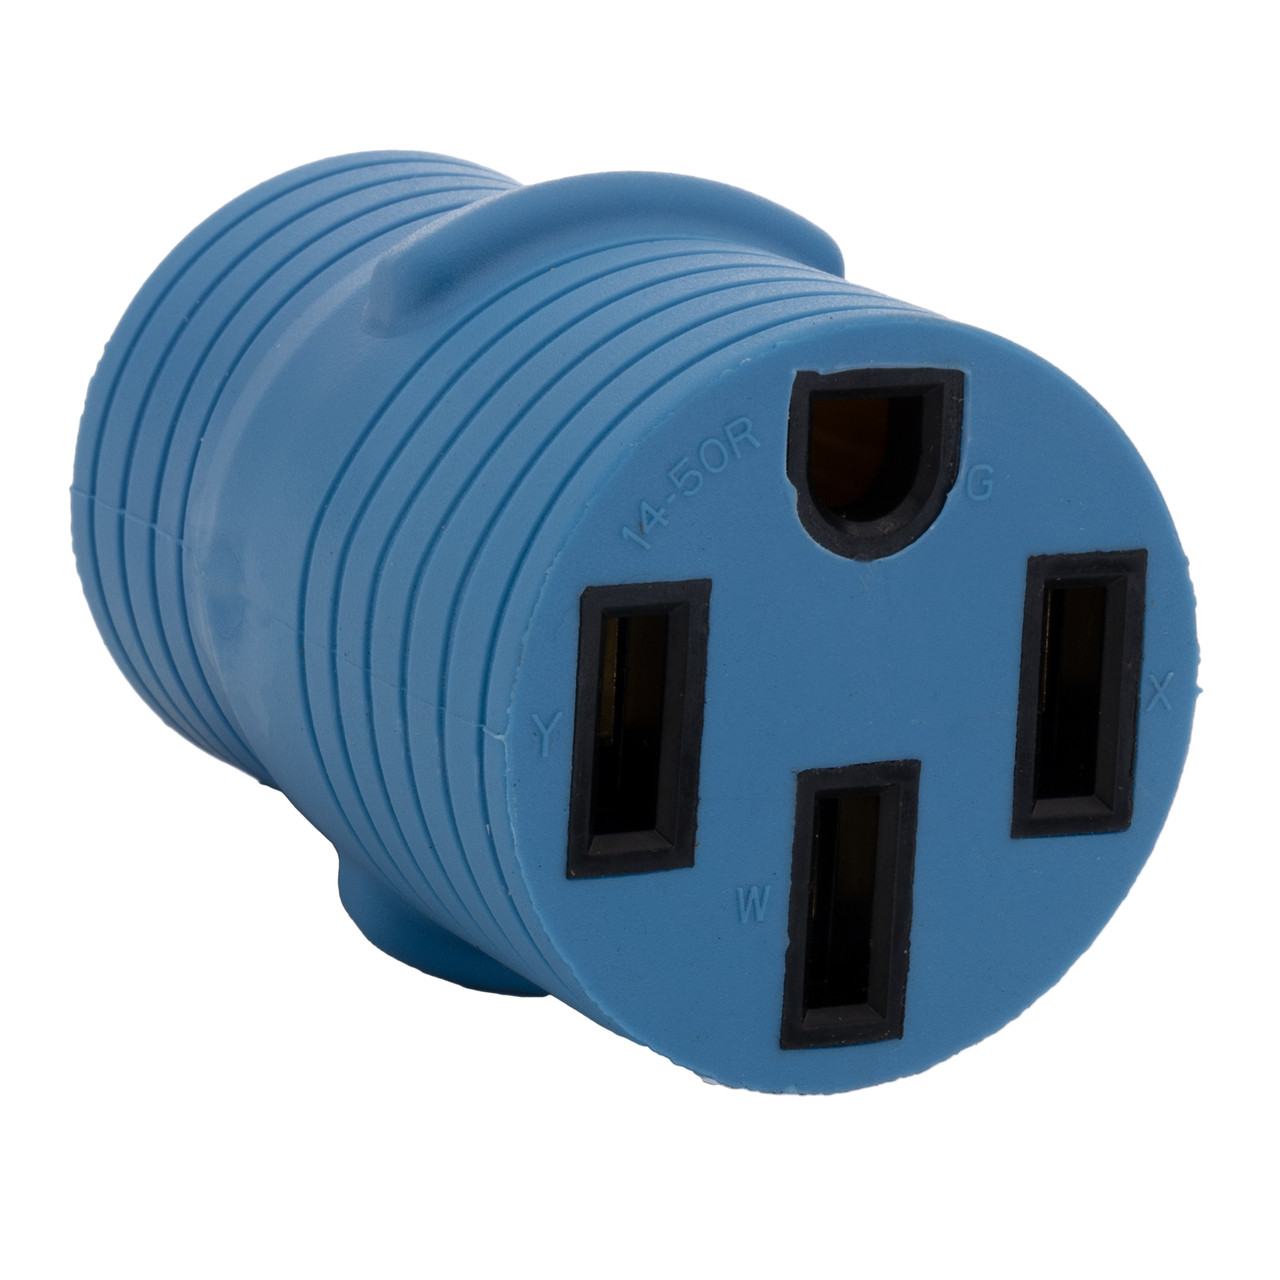 50 Amp RV Plug to 30 Amp Adapter - RecPro